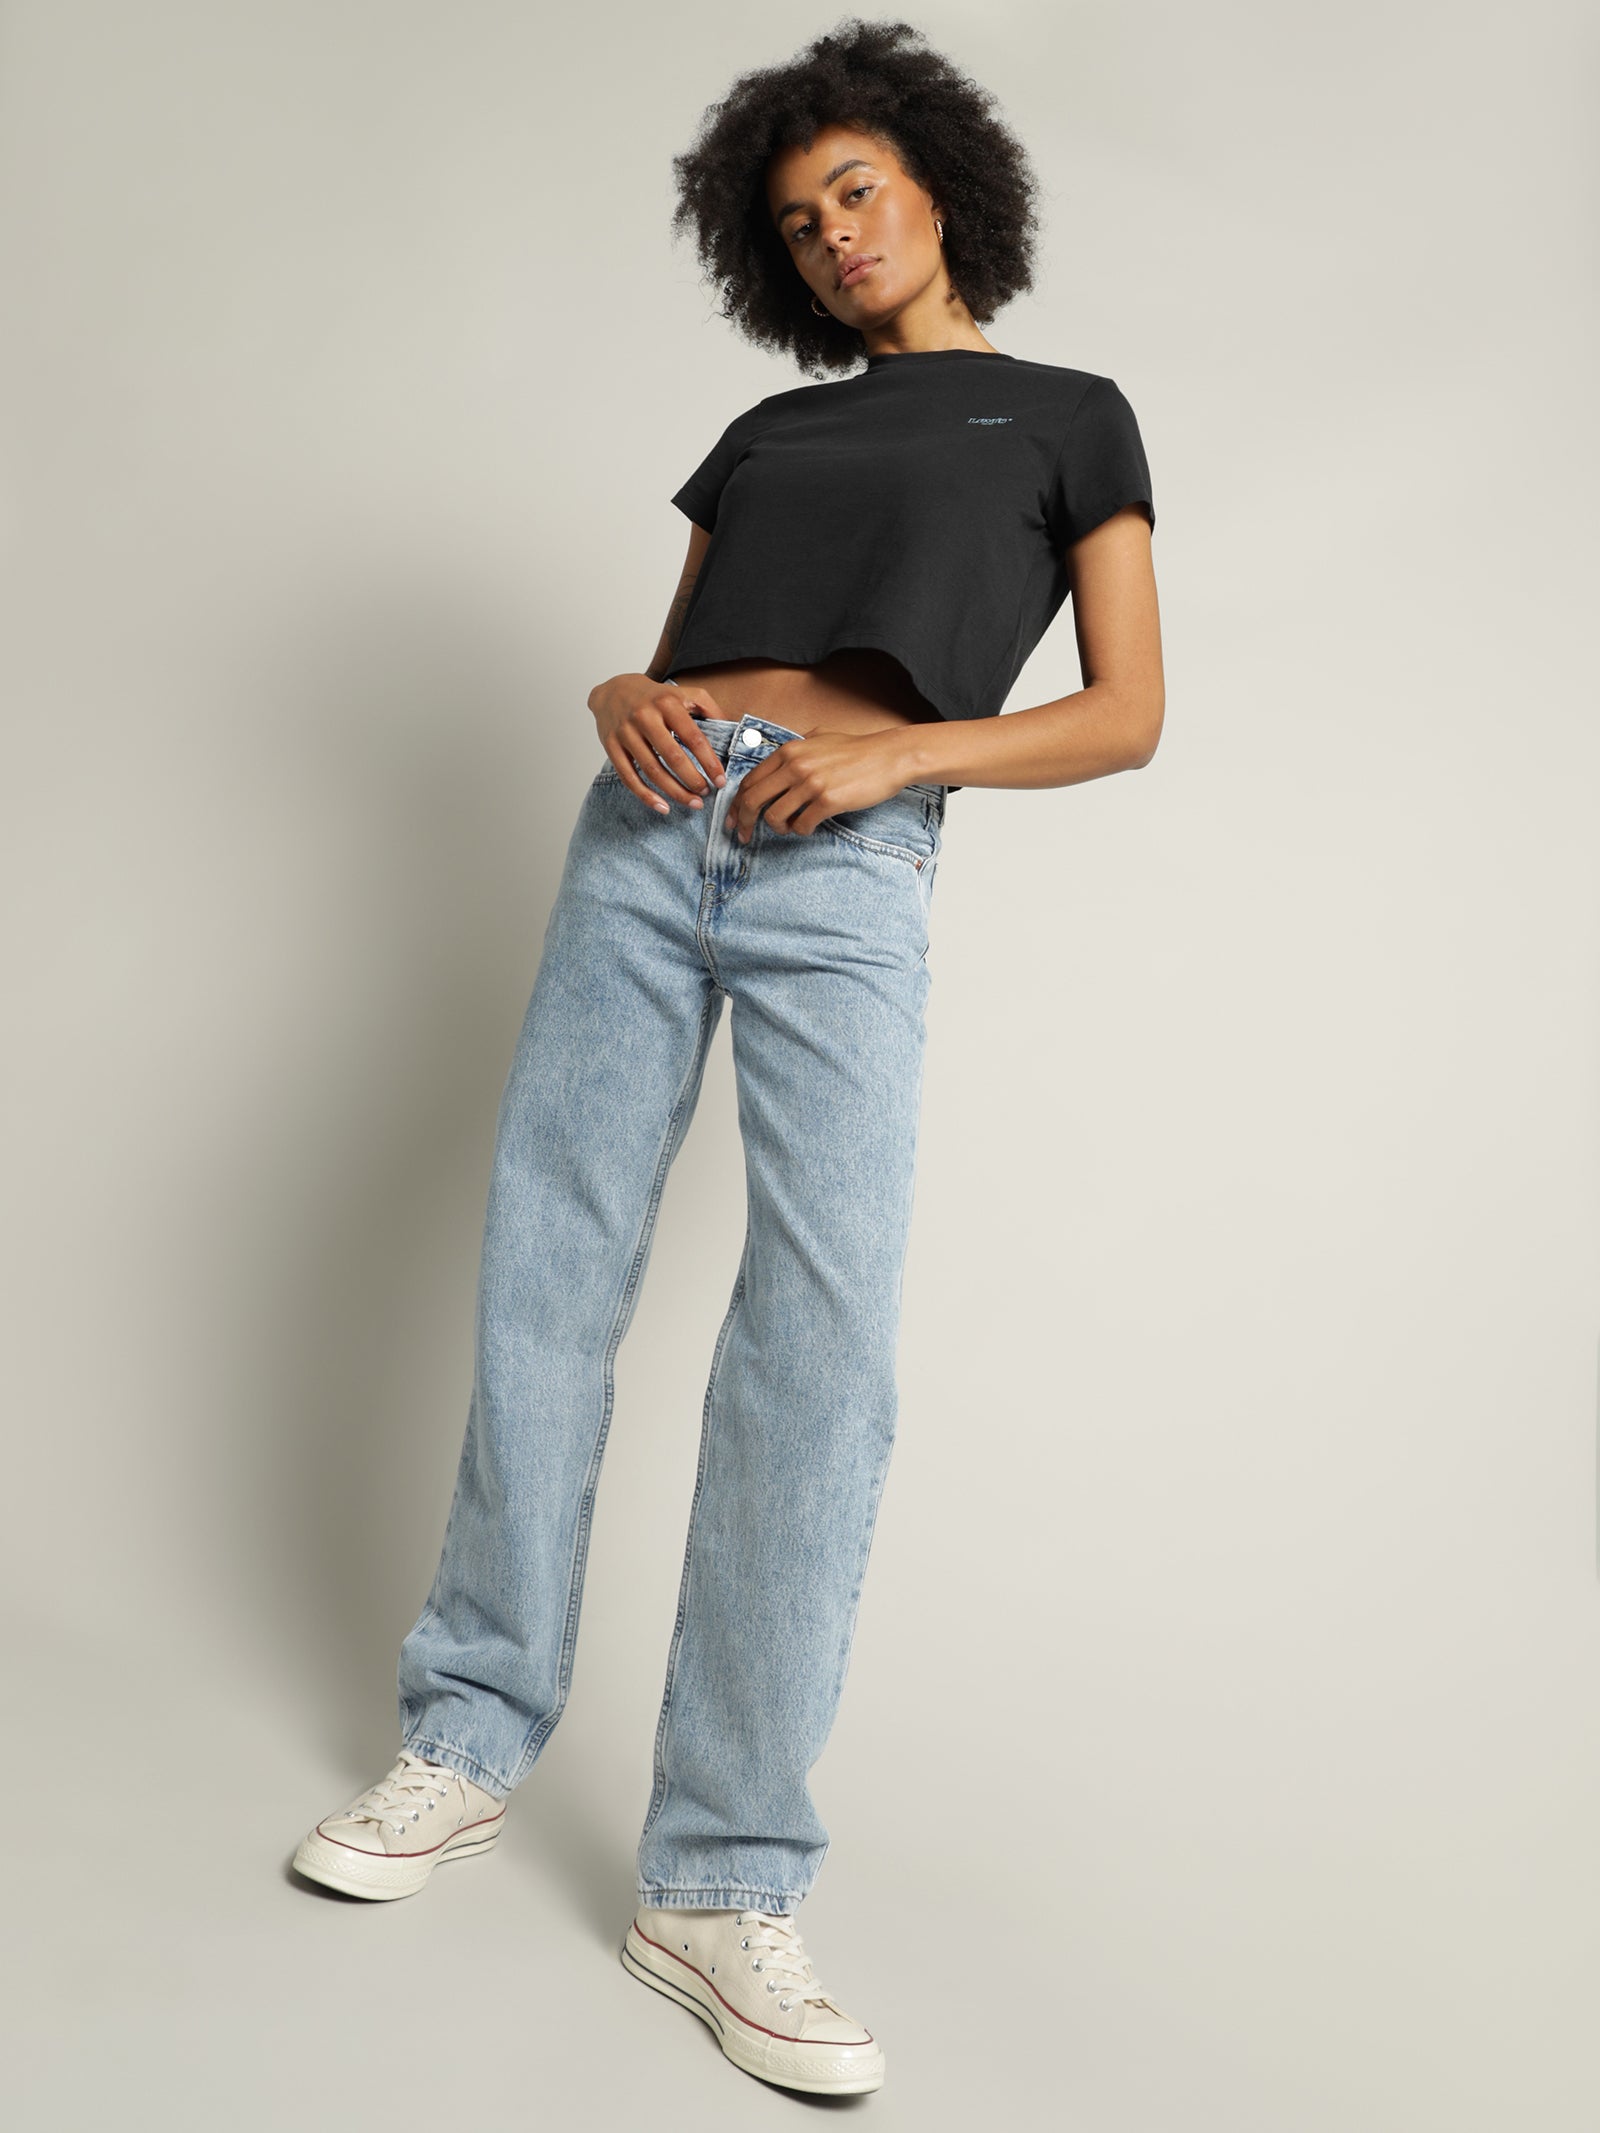 Low Pro Mid Rise Jeans in Charlie Glow Up - Glue Store